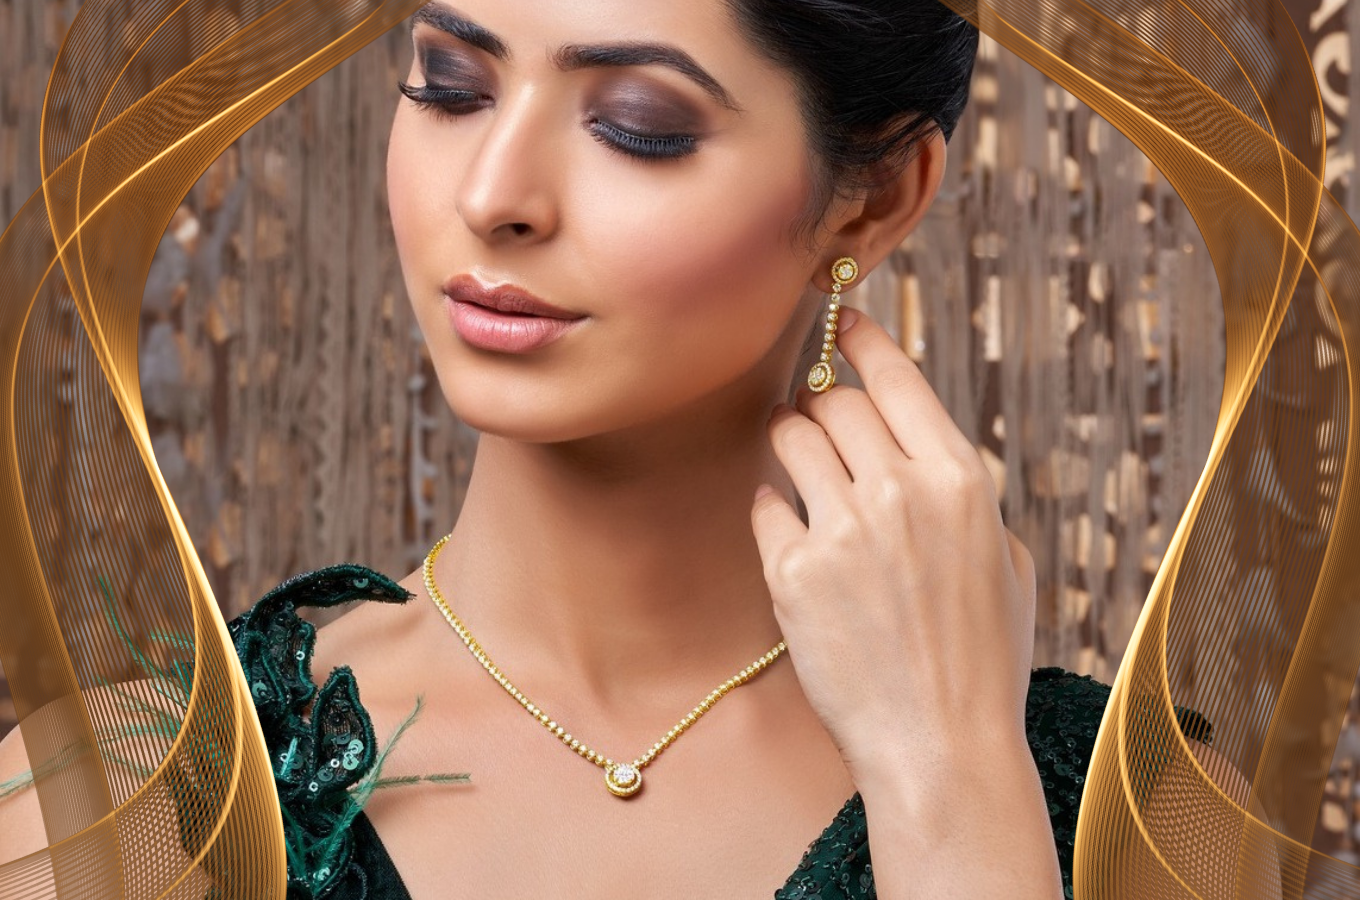 The Golden Touch: Improving Your Appearance with a Gorgeous Necklace and Earring Set